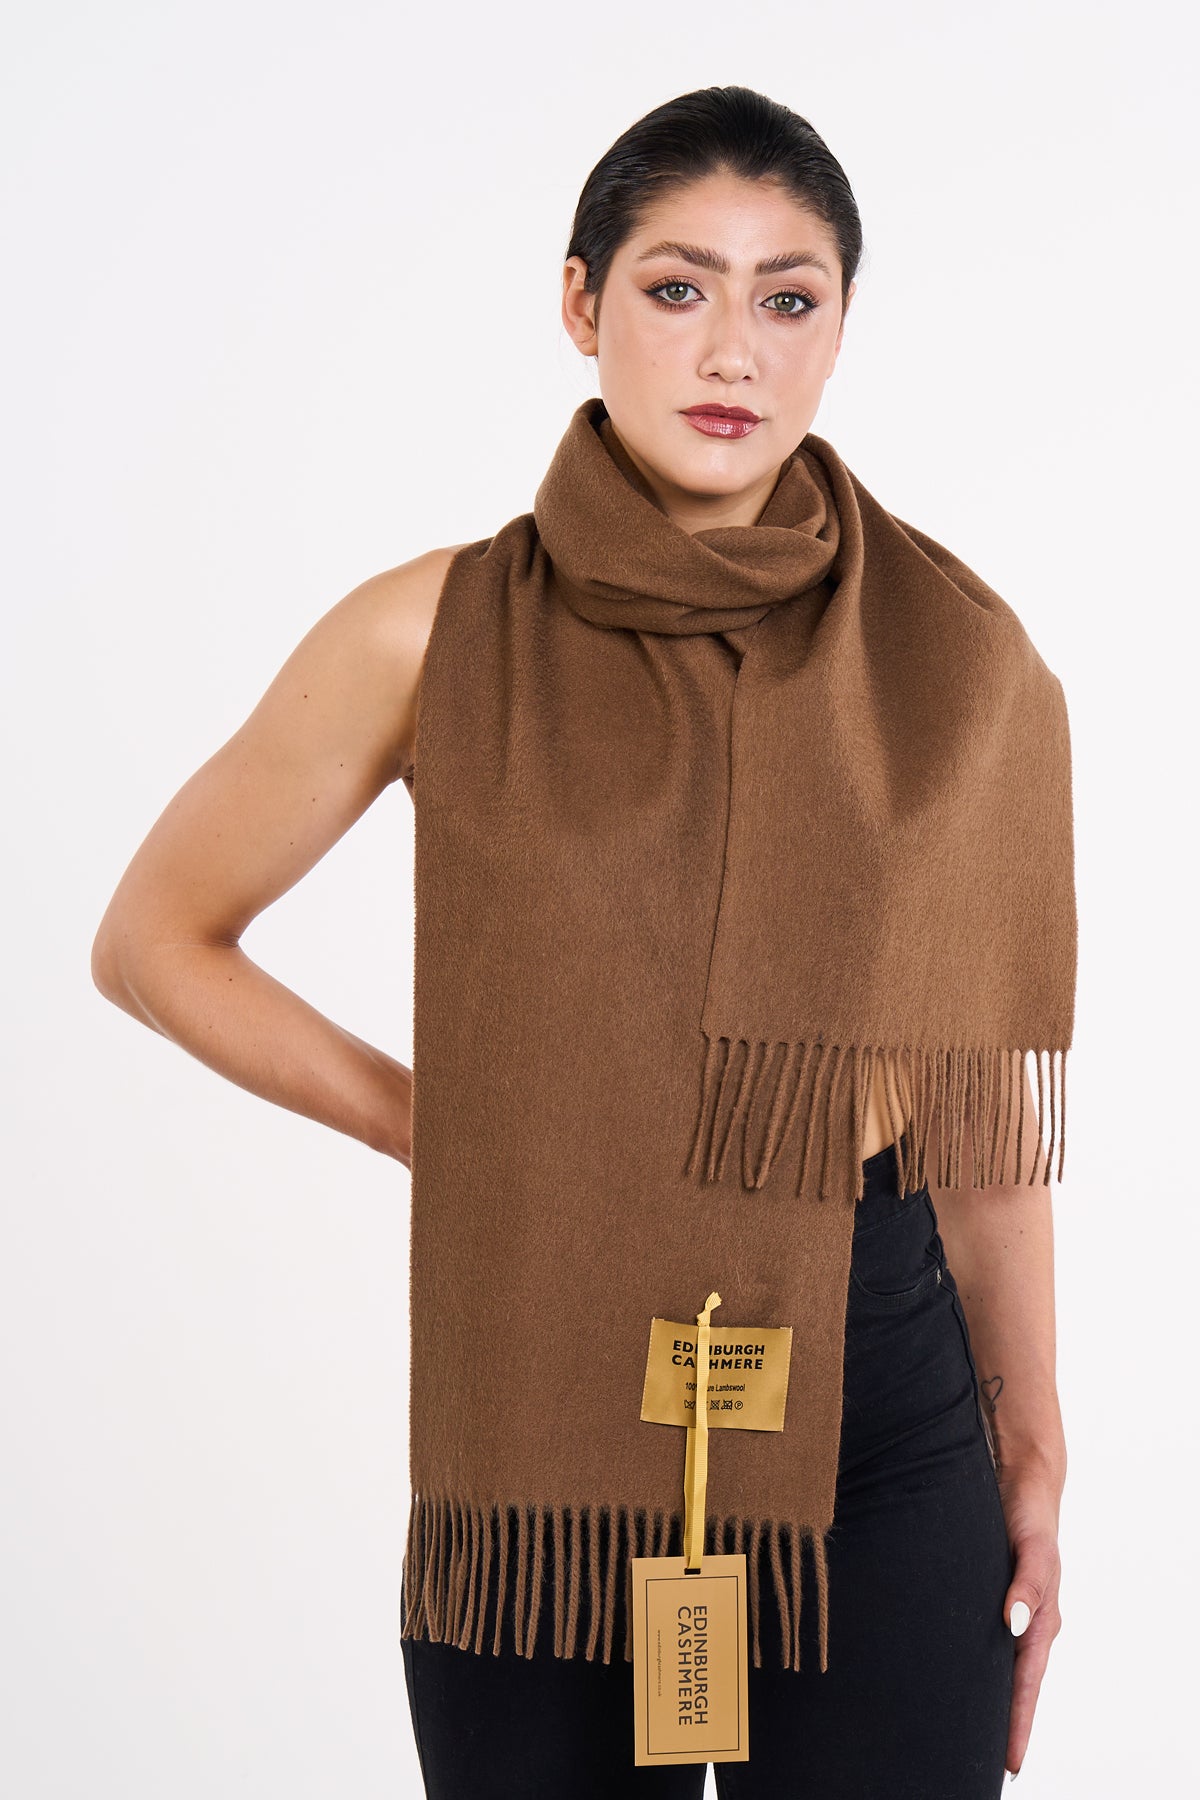 Scarf Plain Brown 100% Pure Lambswool